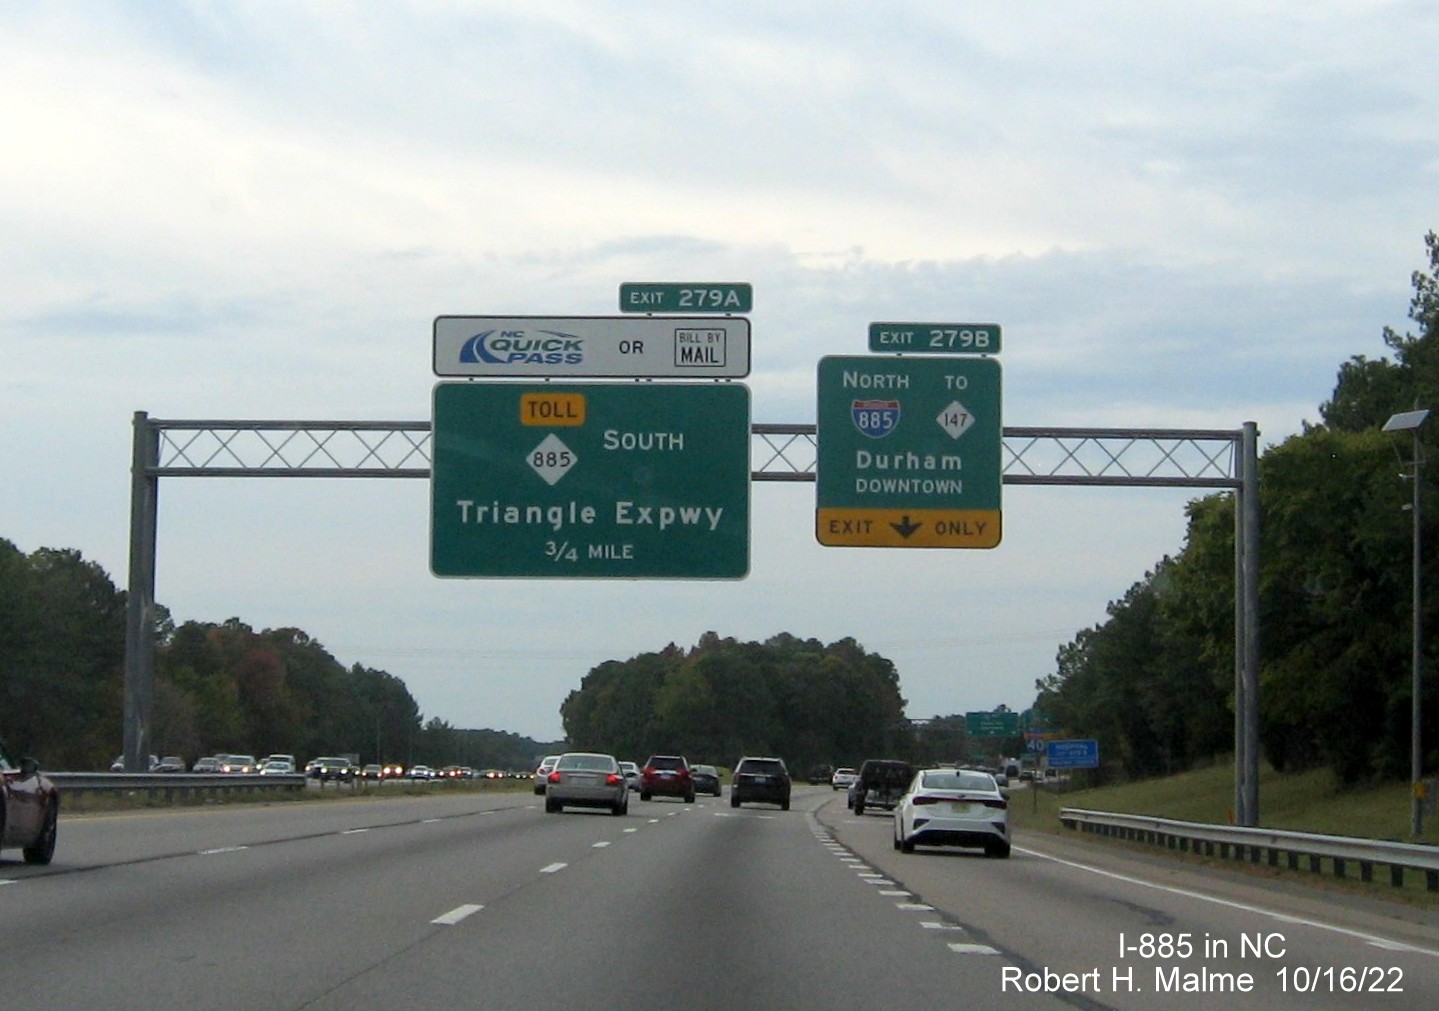 Image of 1/2 mile advance sign for new I-885/Durham Freeway exit on I-40 West in Durham, October 2022